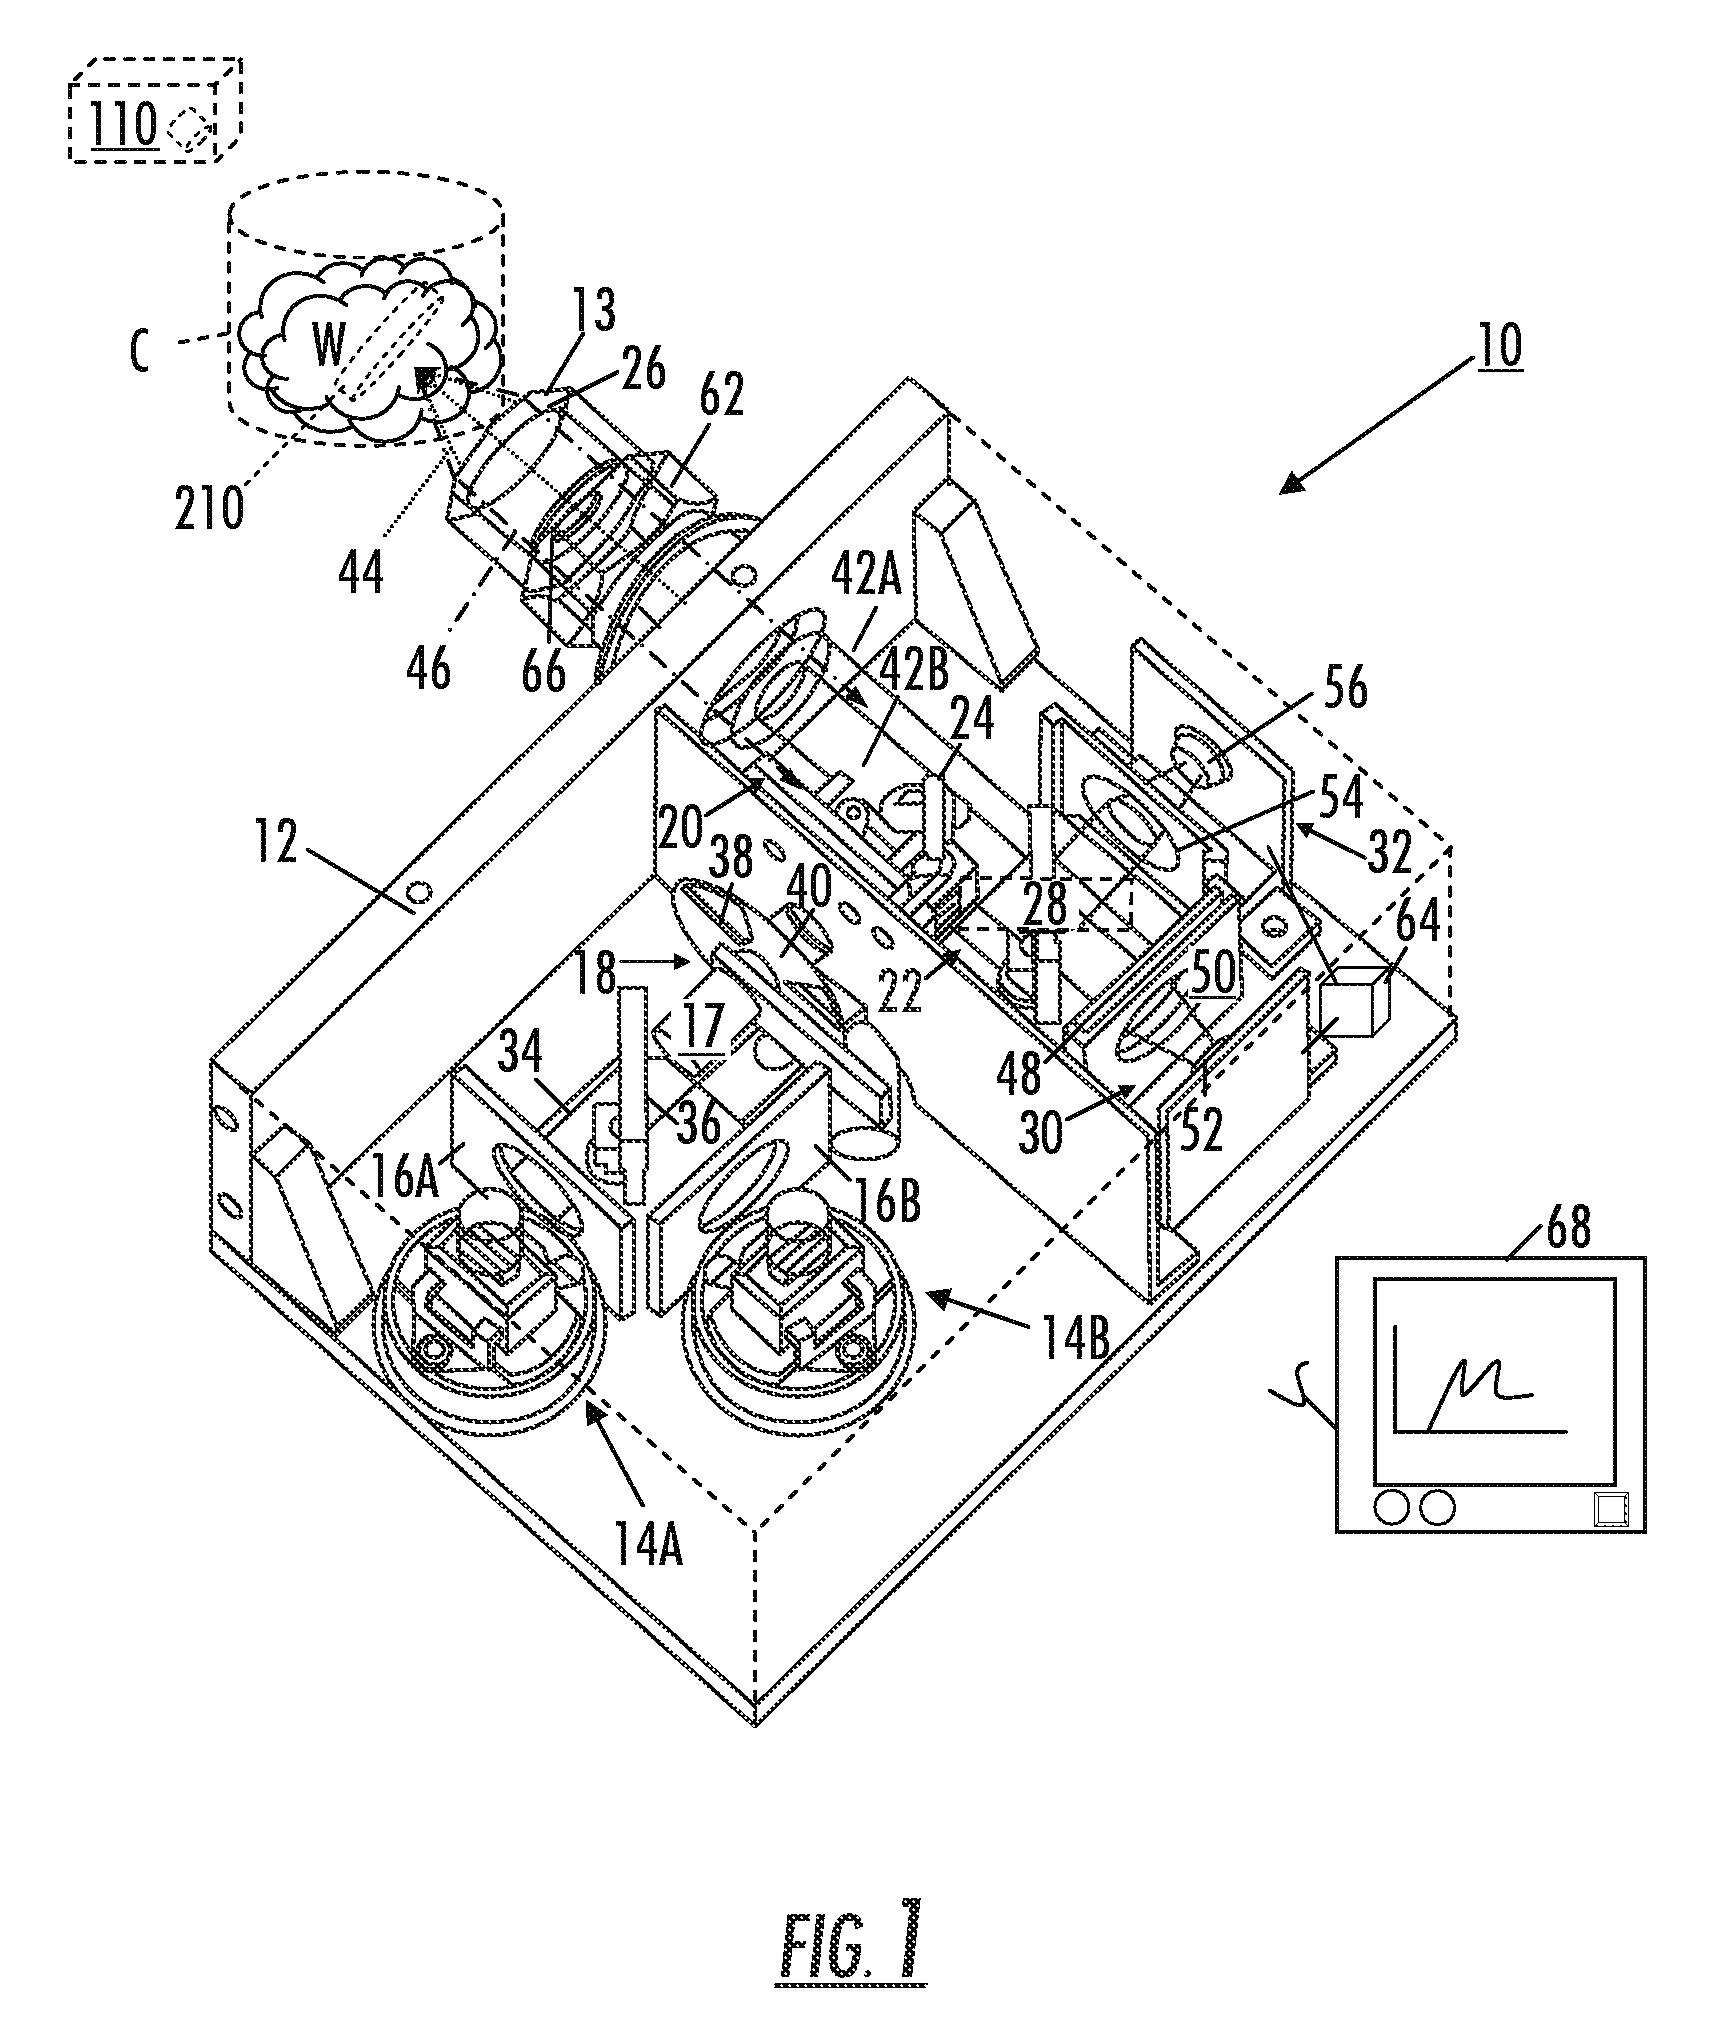 Self-contained multivariate optical computing and analysis system